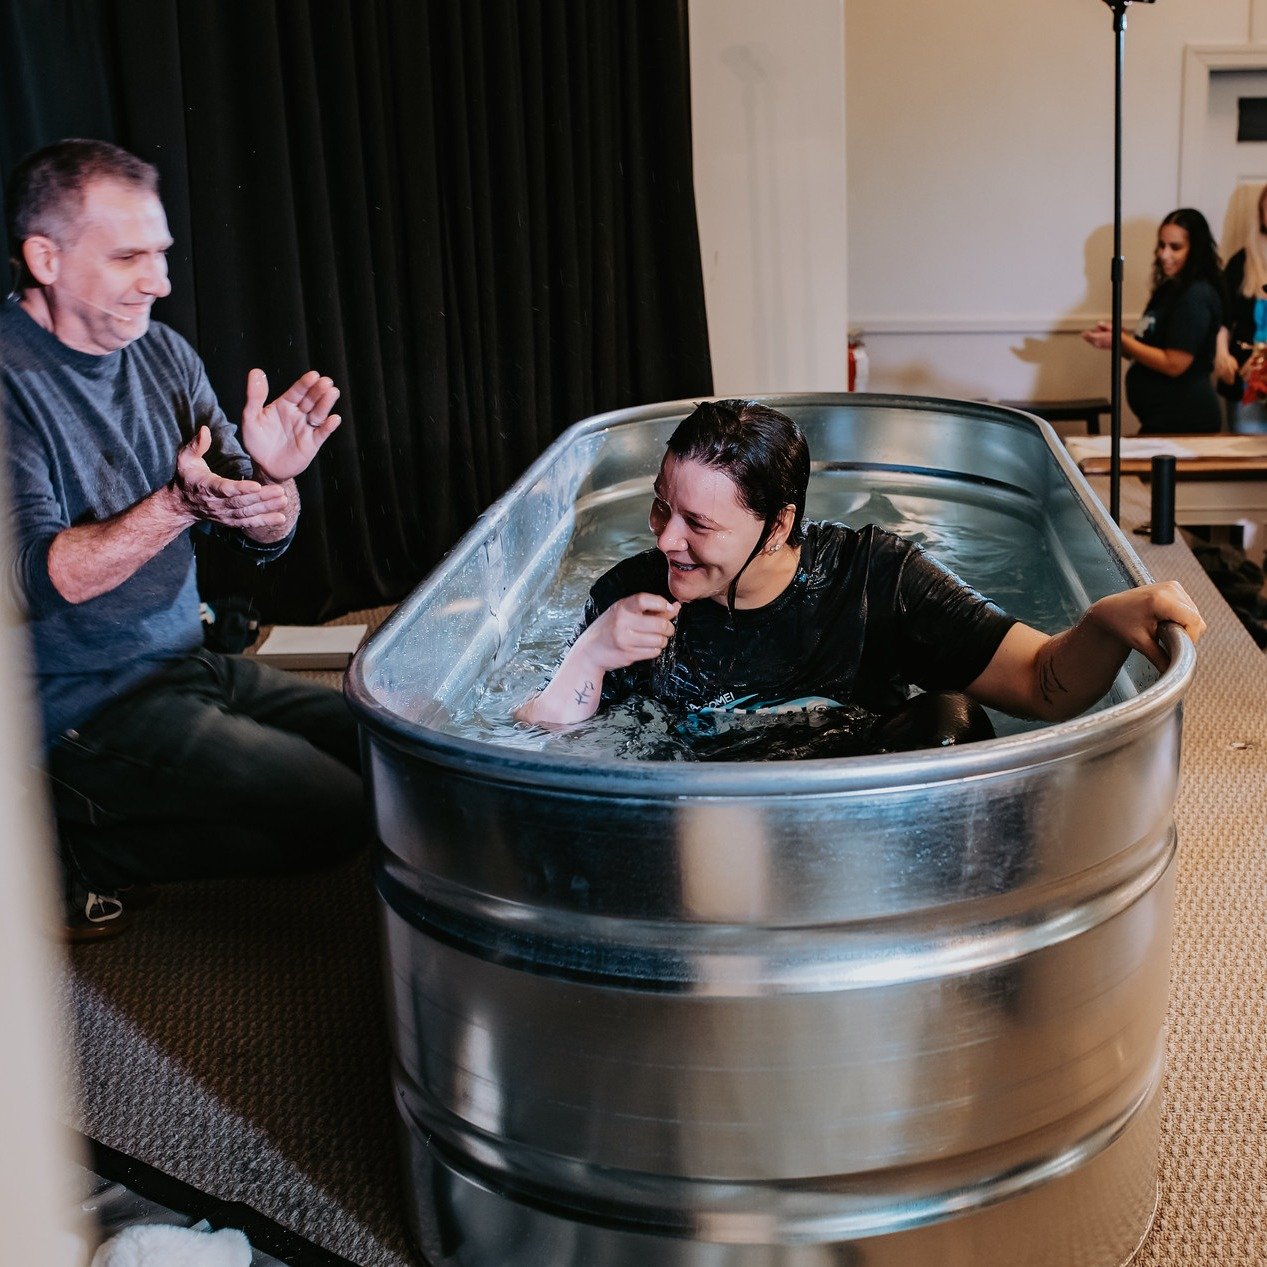 🌊✨ Dive into the joy of Baptism Sunday! 🌊✨

Join us for one of our favorite days, a day filled with celebration! For 2000 years, Christians have embraced the powerful act of baptism, boldly declaring their faith and commitment to following Jesus.

